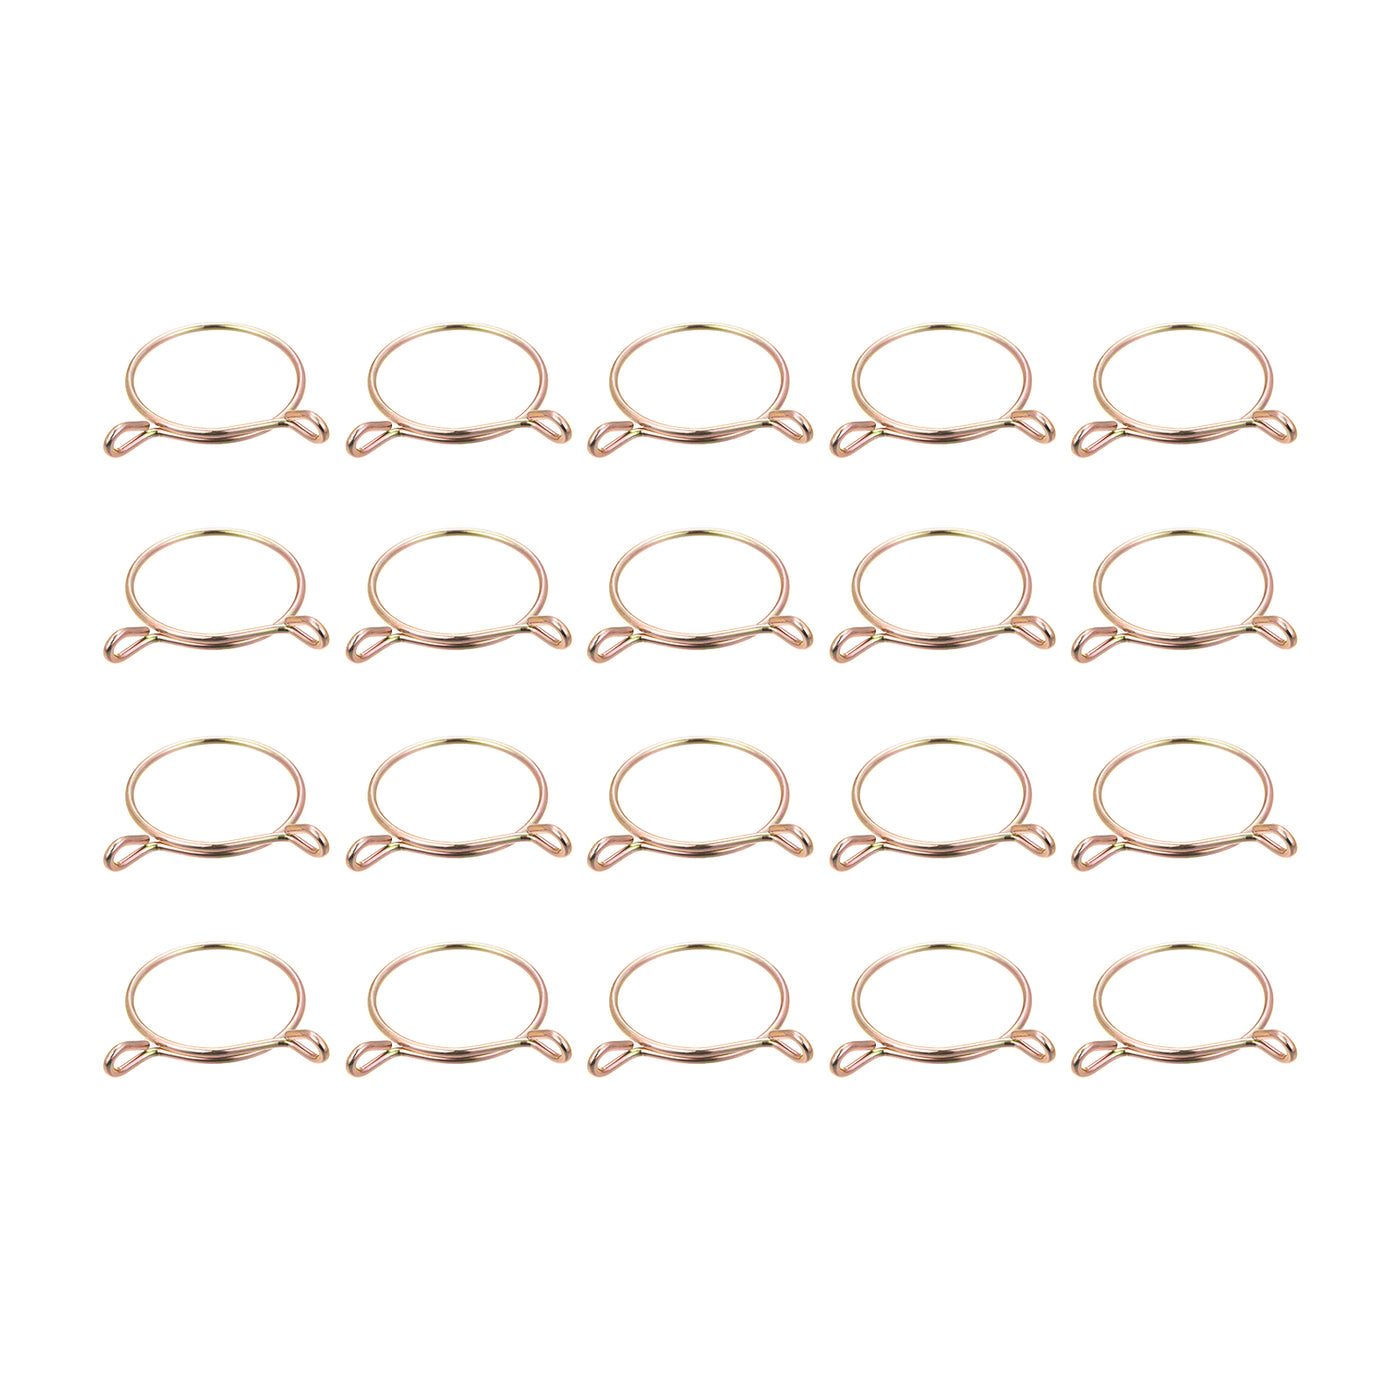 Uxcell Uxcell Fuel Line Hose Clips, 20pcs 42mm 65Mn Steel Tubing Spring Clamps